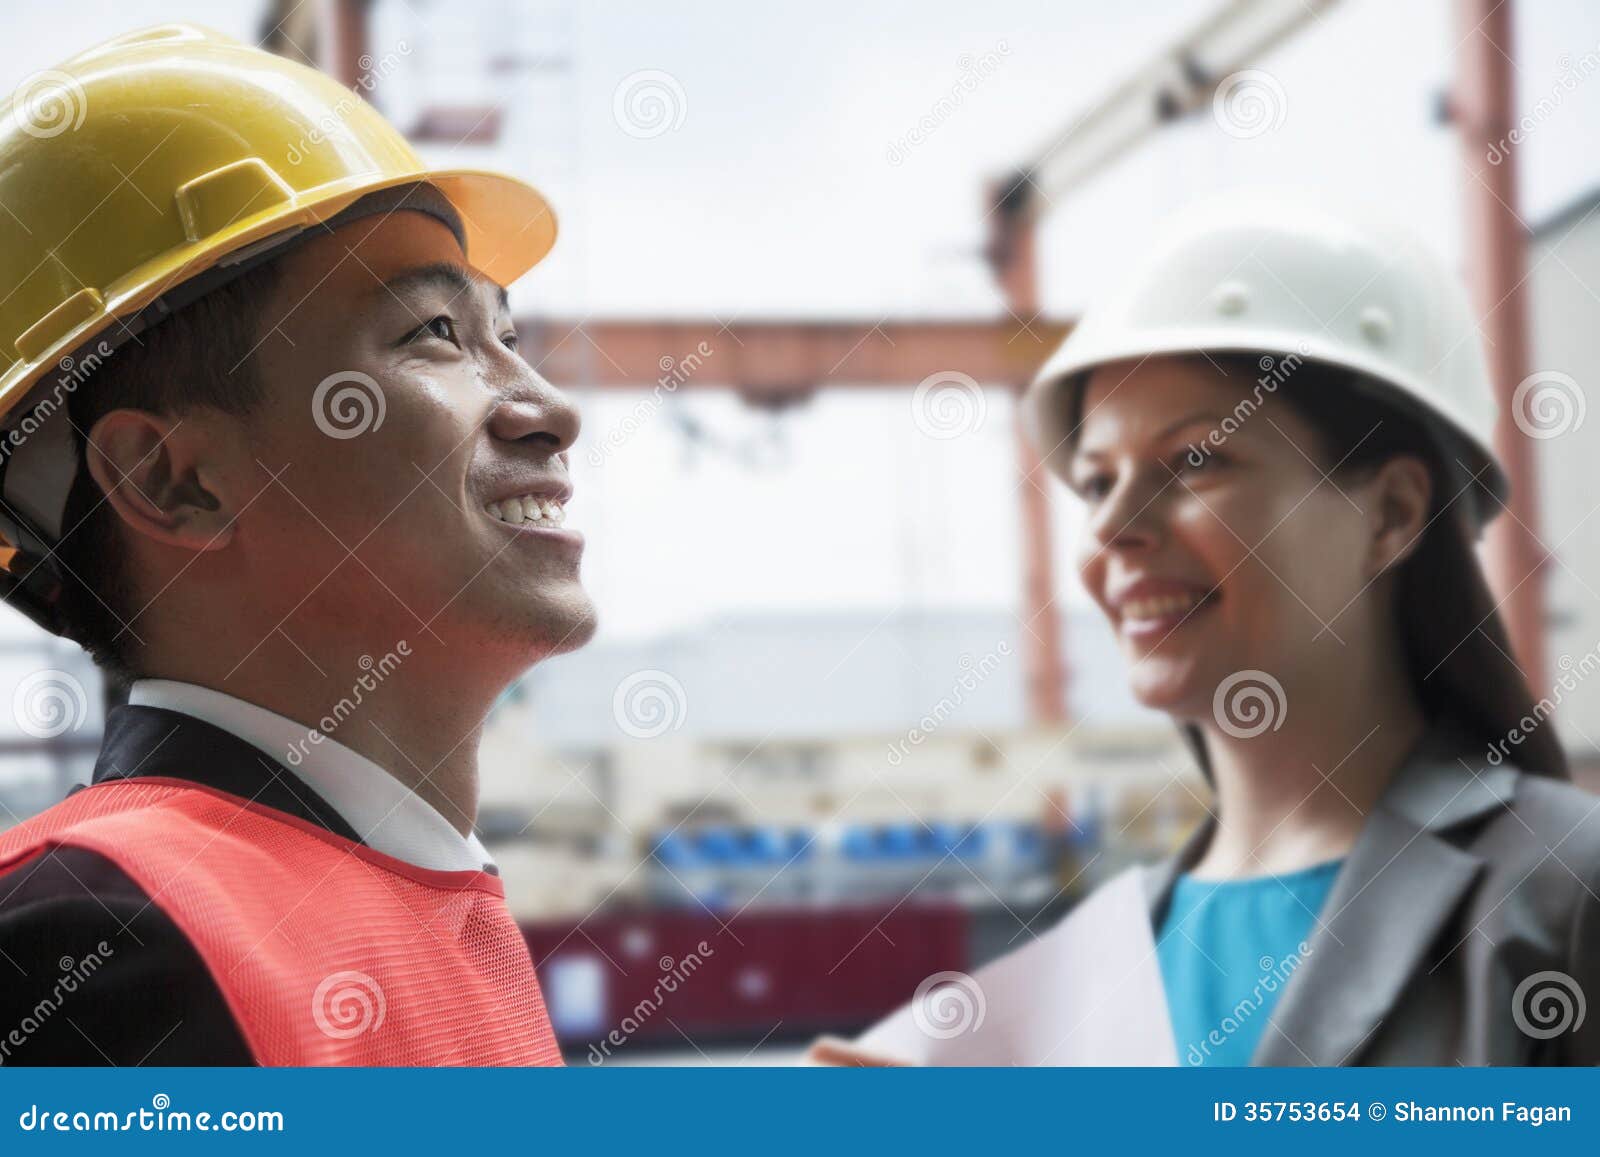 two engineers smiling in protective workwear outside in a shipping yard